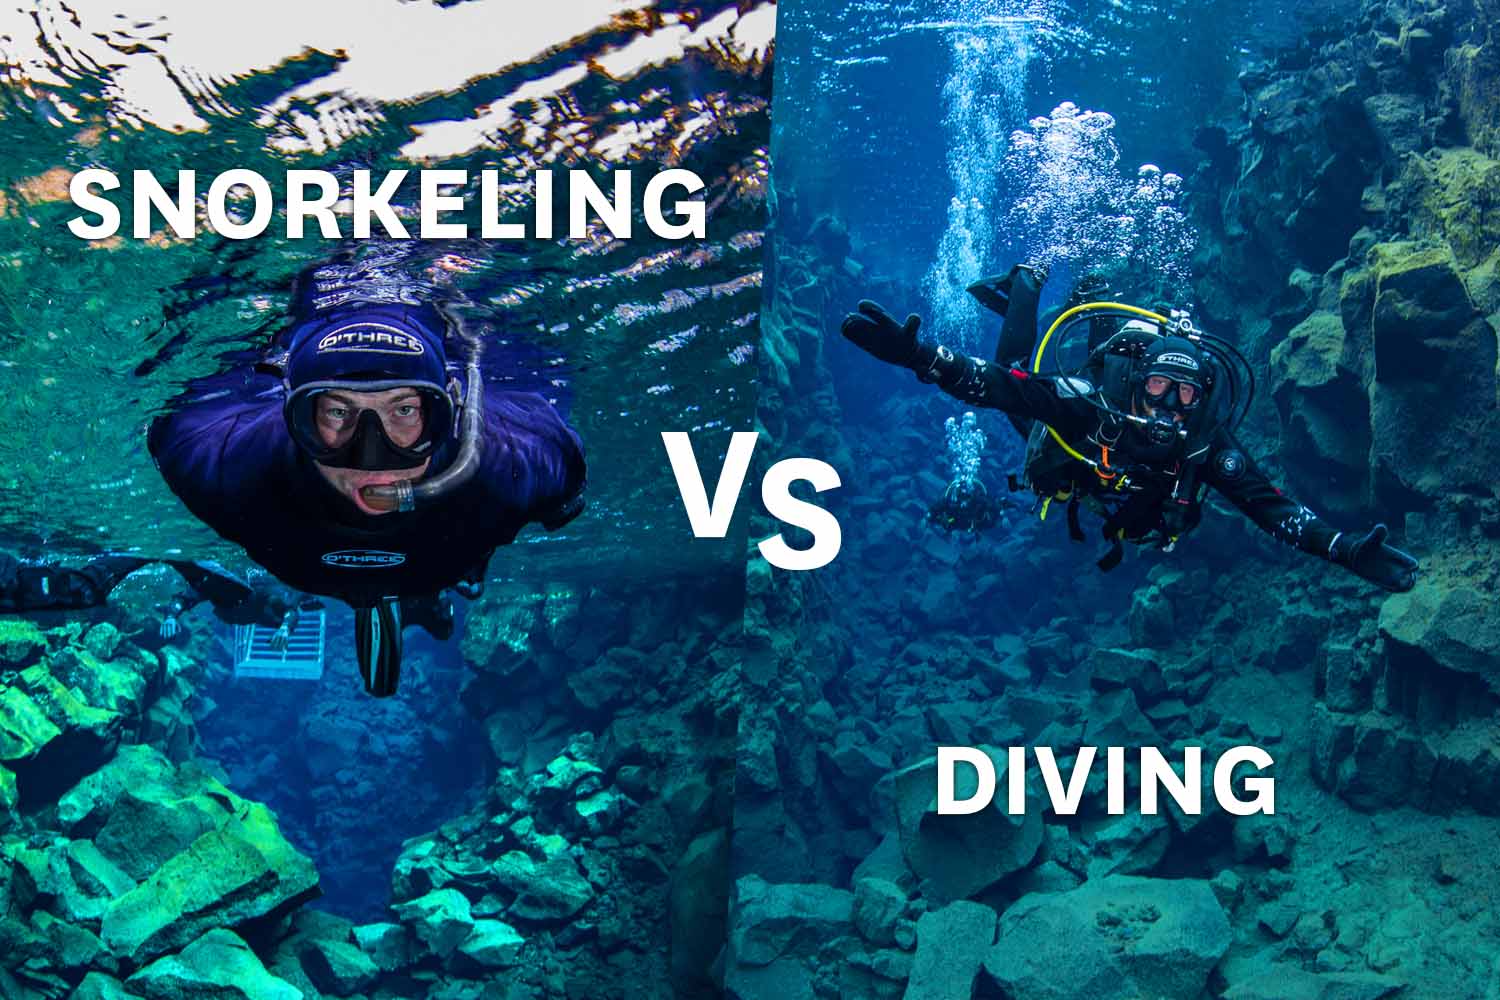 Wetsuit vs Drysuit in Scuba Diving – The Differences between the